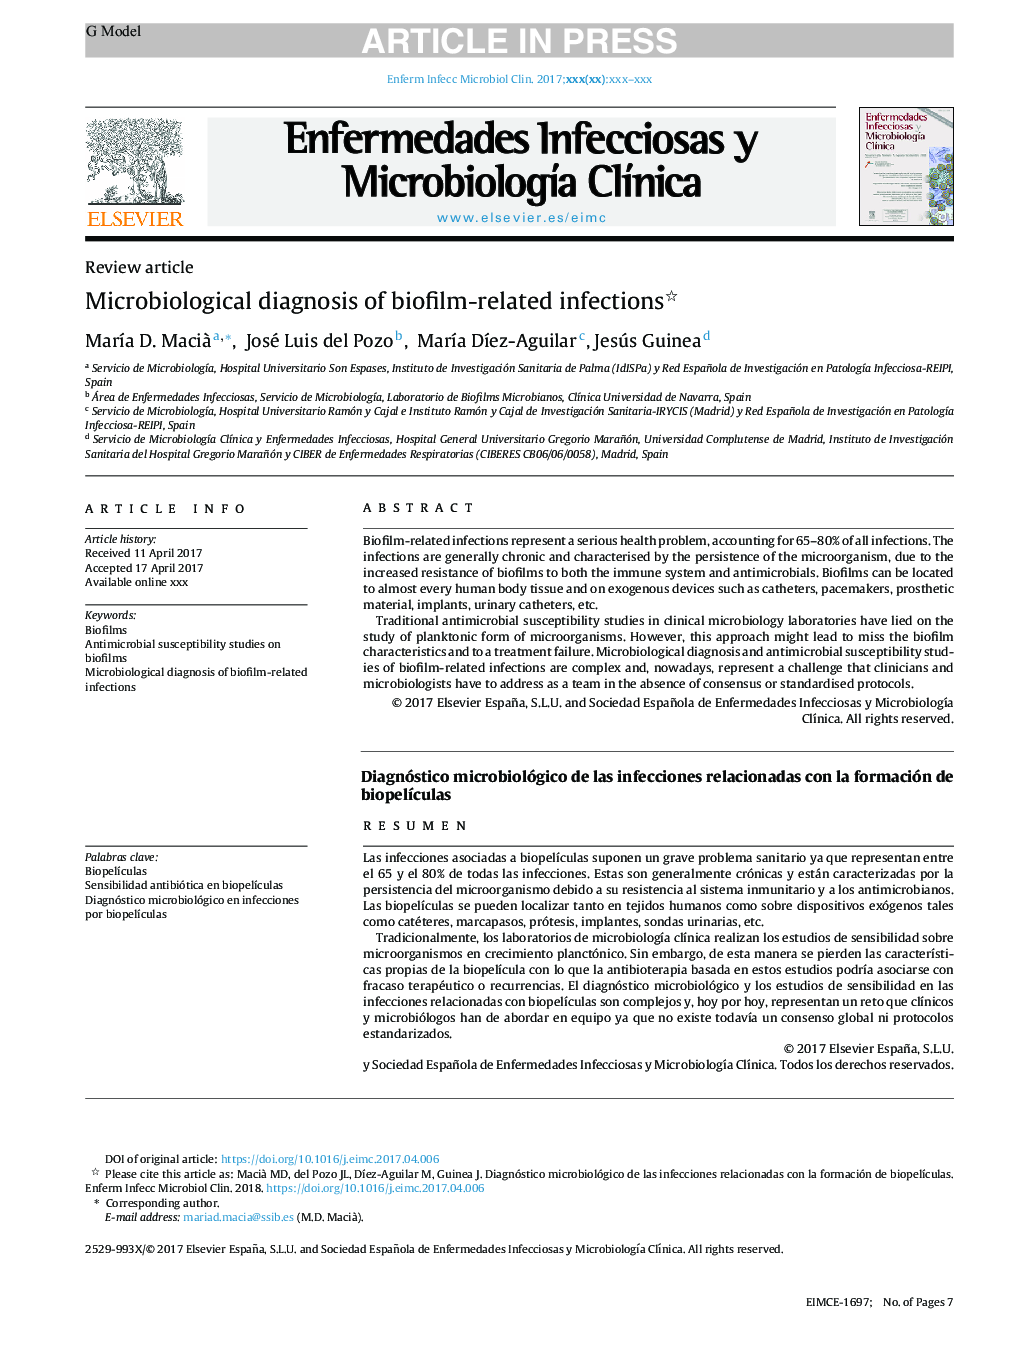 Microbiological diagnosis of biofilm-related infections